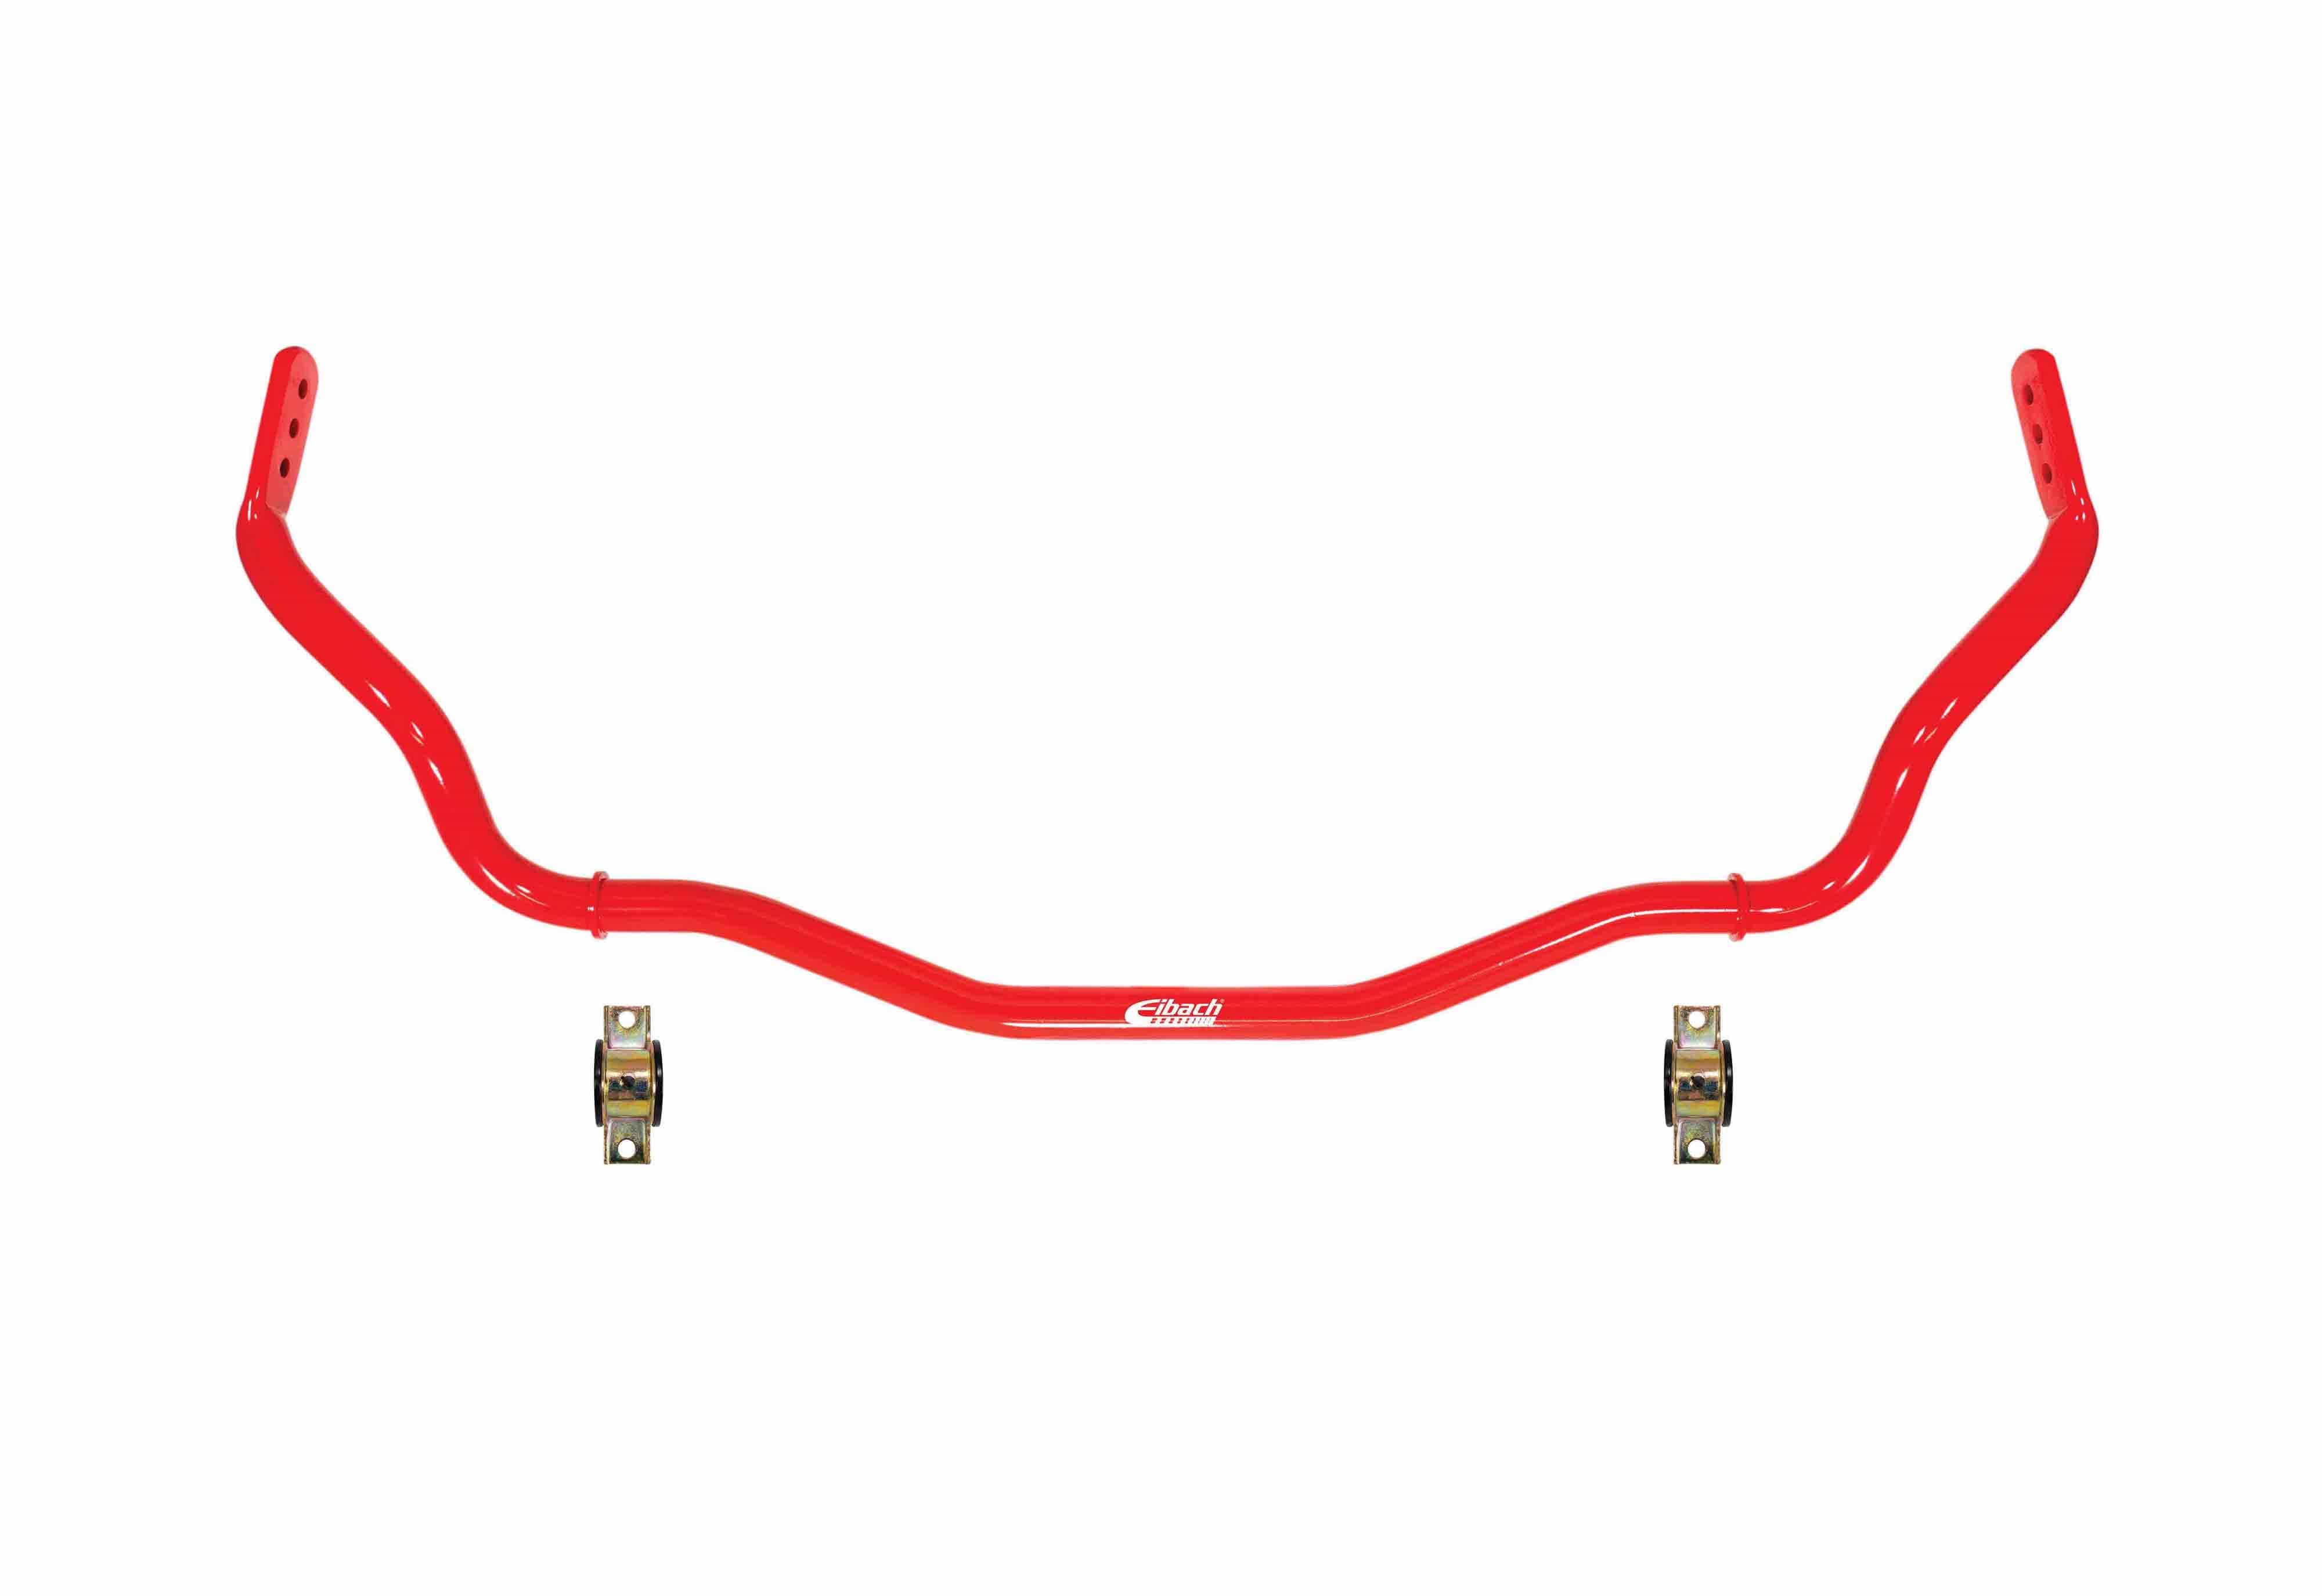 Eibach Front Sway Bar for 2015-2017 Ford Mustang GT Coupe (S550)